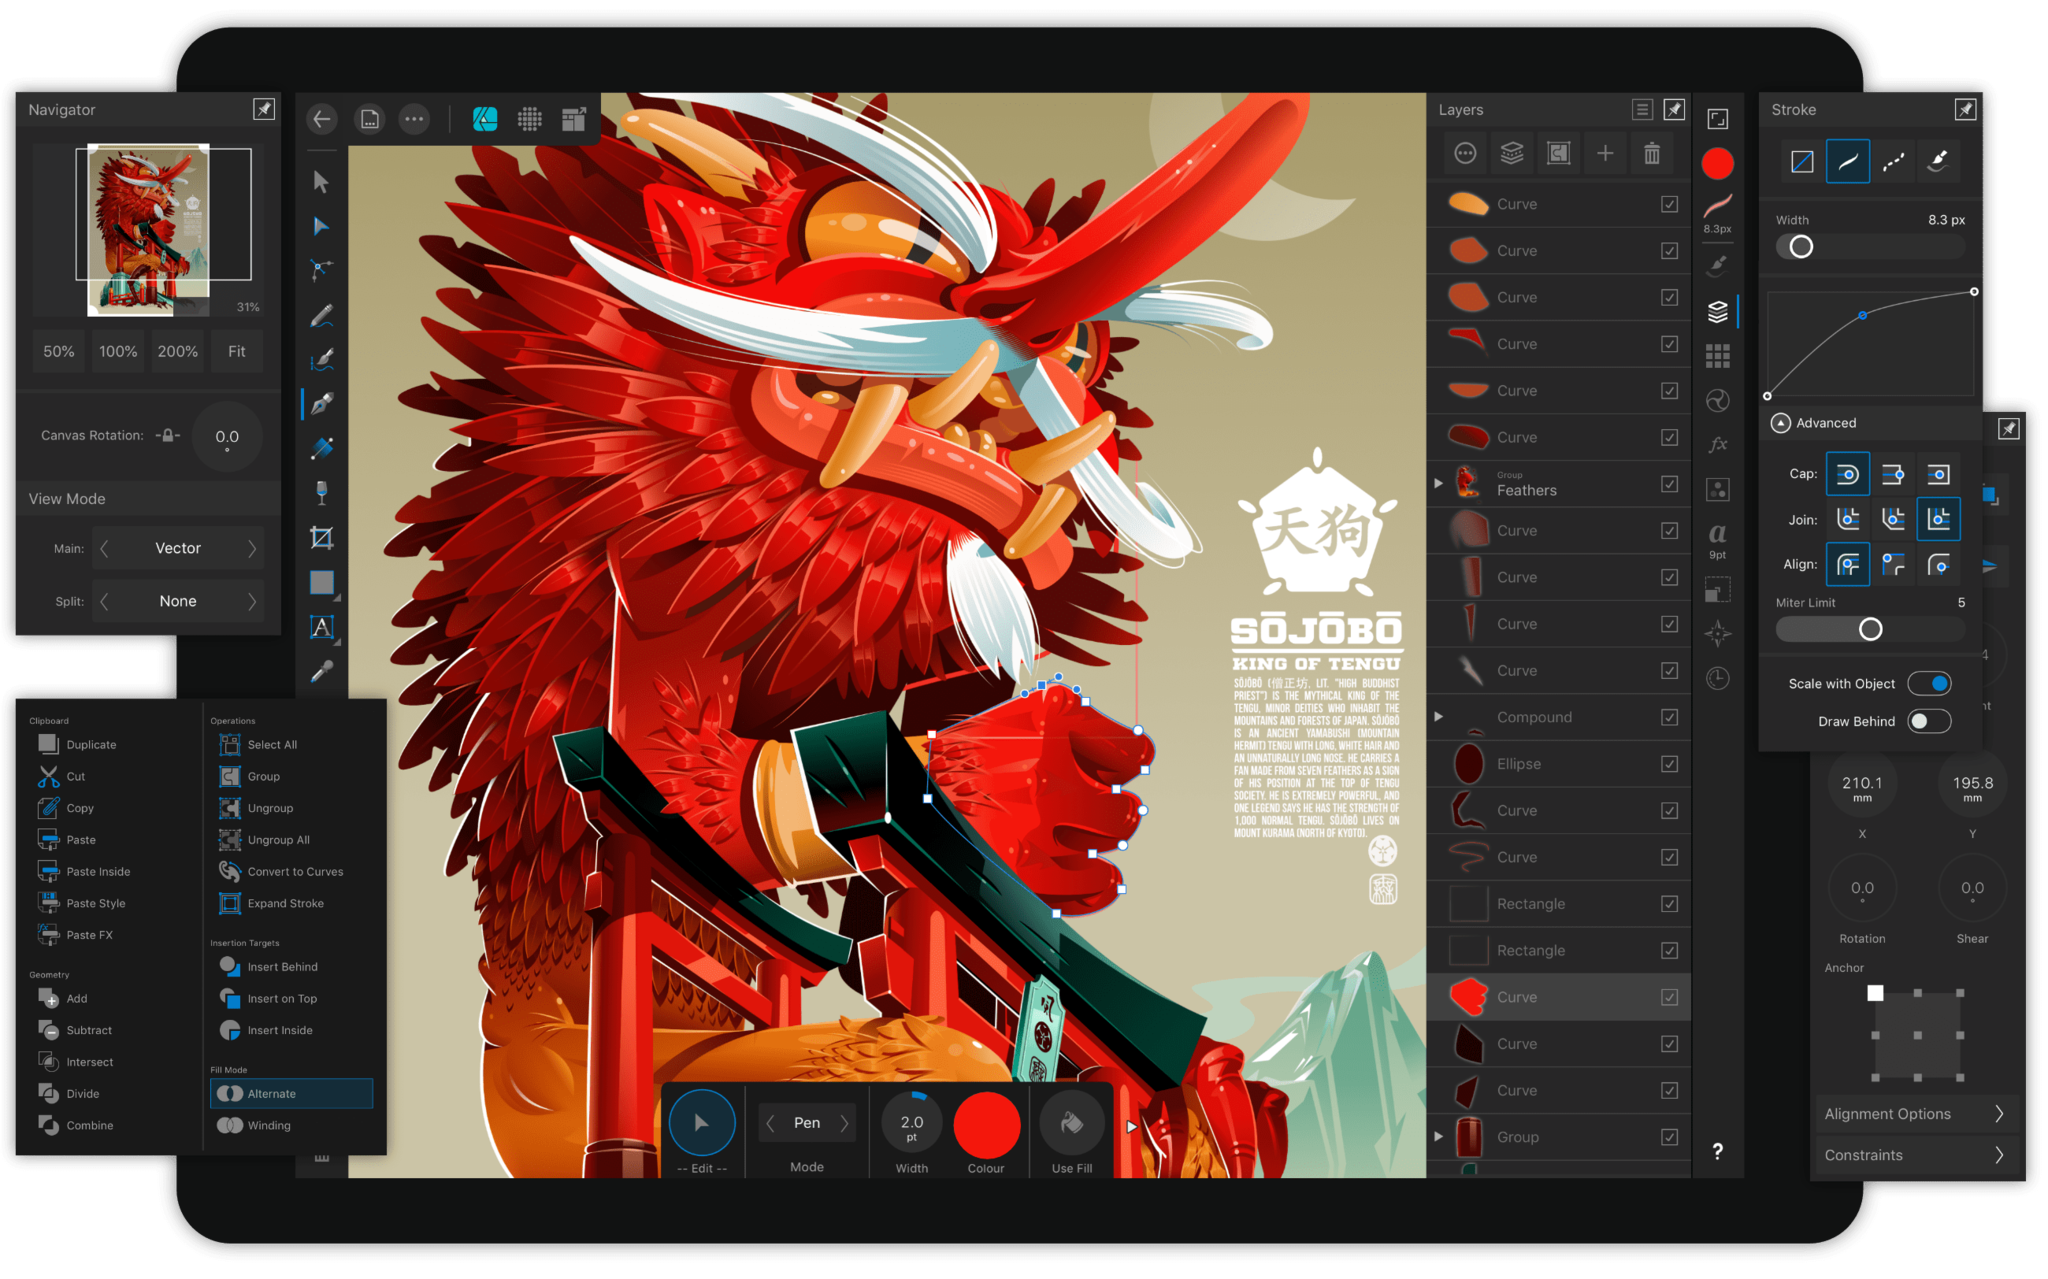 The Affinity Designer 2 app being displayed on an iPad.